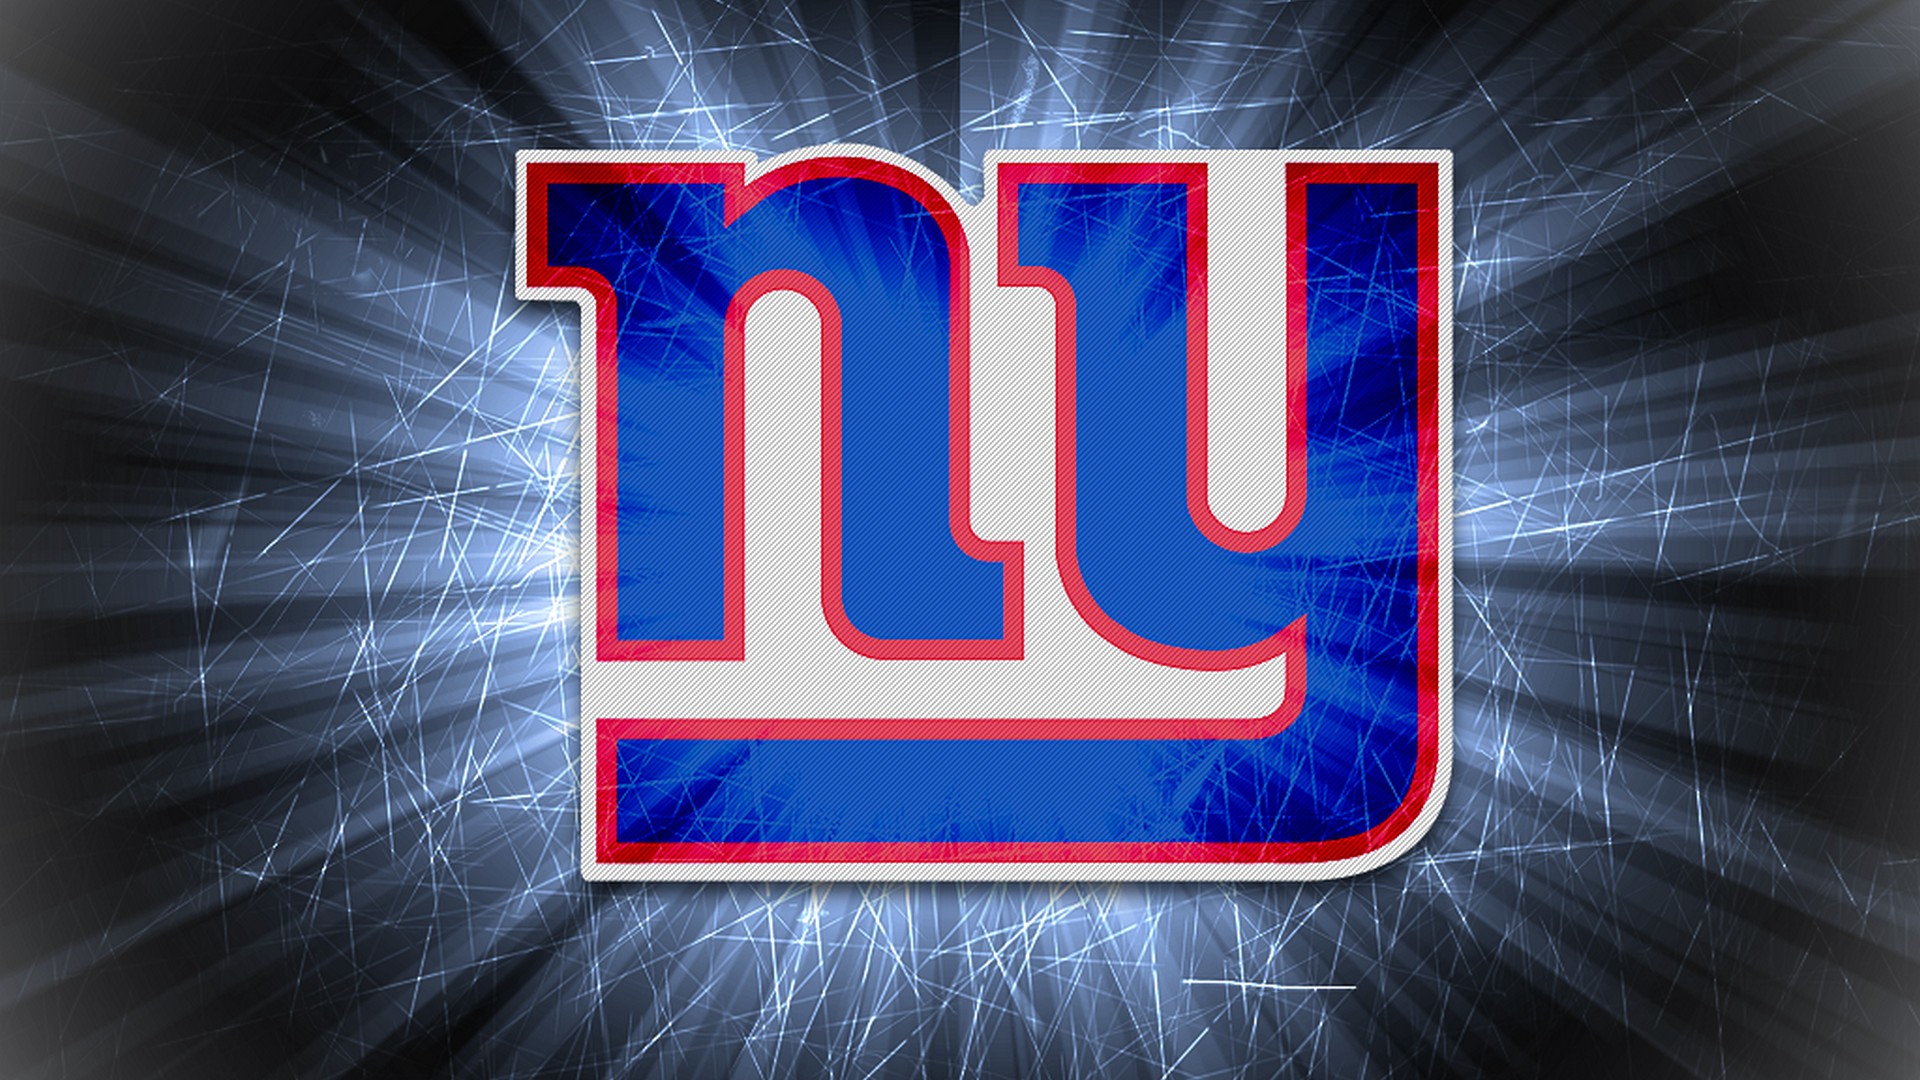 Free download New York Giants HD Wallpapers 2020 NFL Football